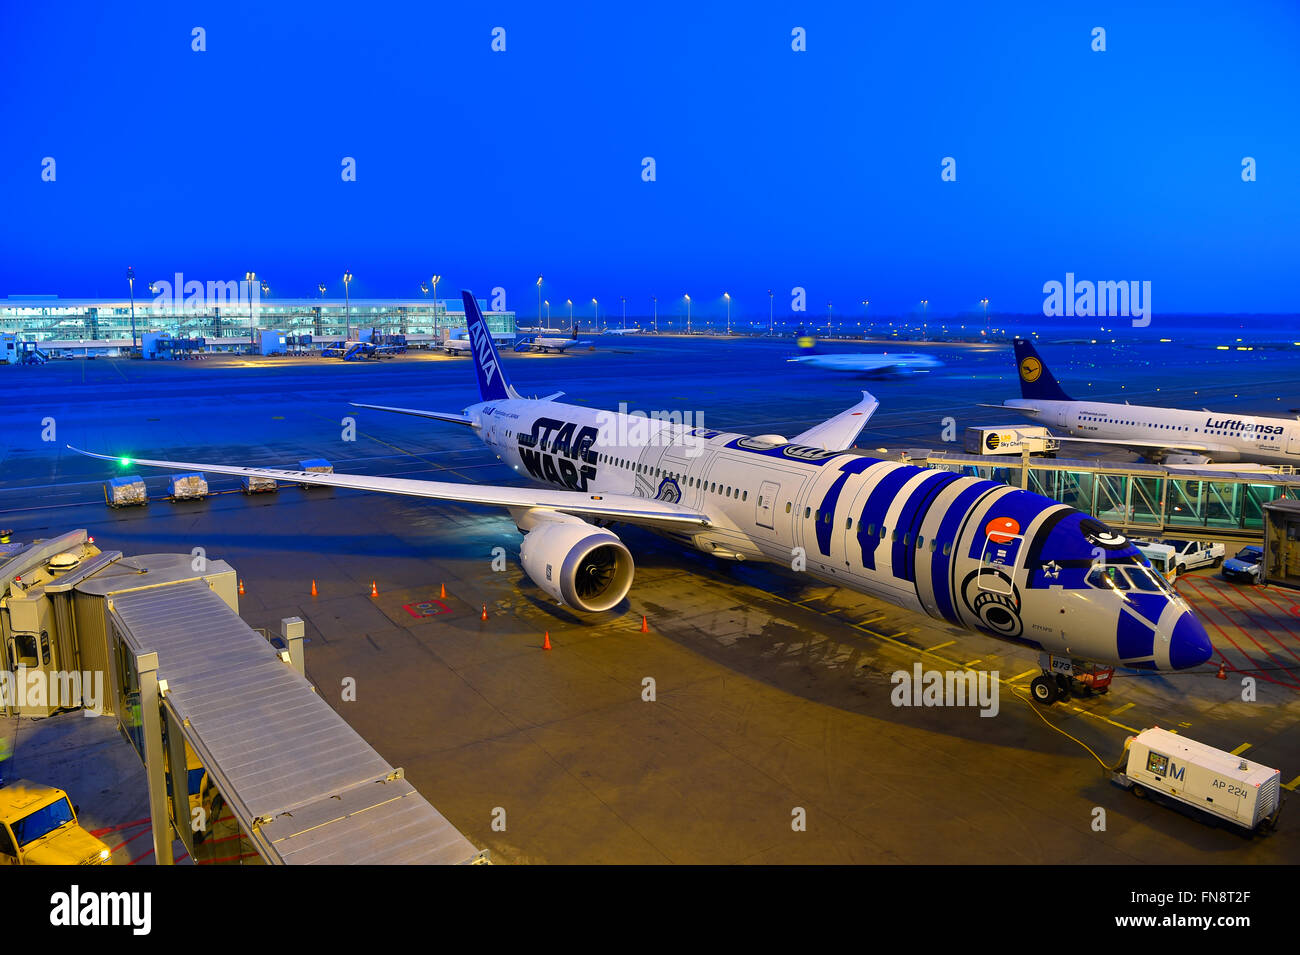 Boeing, B 787, B787, 8, Dreamliner, Dream Liner, ANA, All Nipon Airways, Star Wars, R2 D2, aircraft, airport, overview, panorama Stock Photo